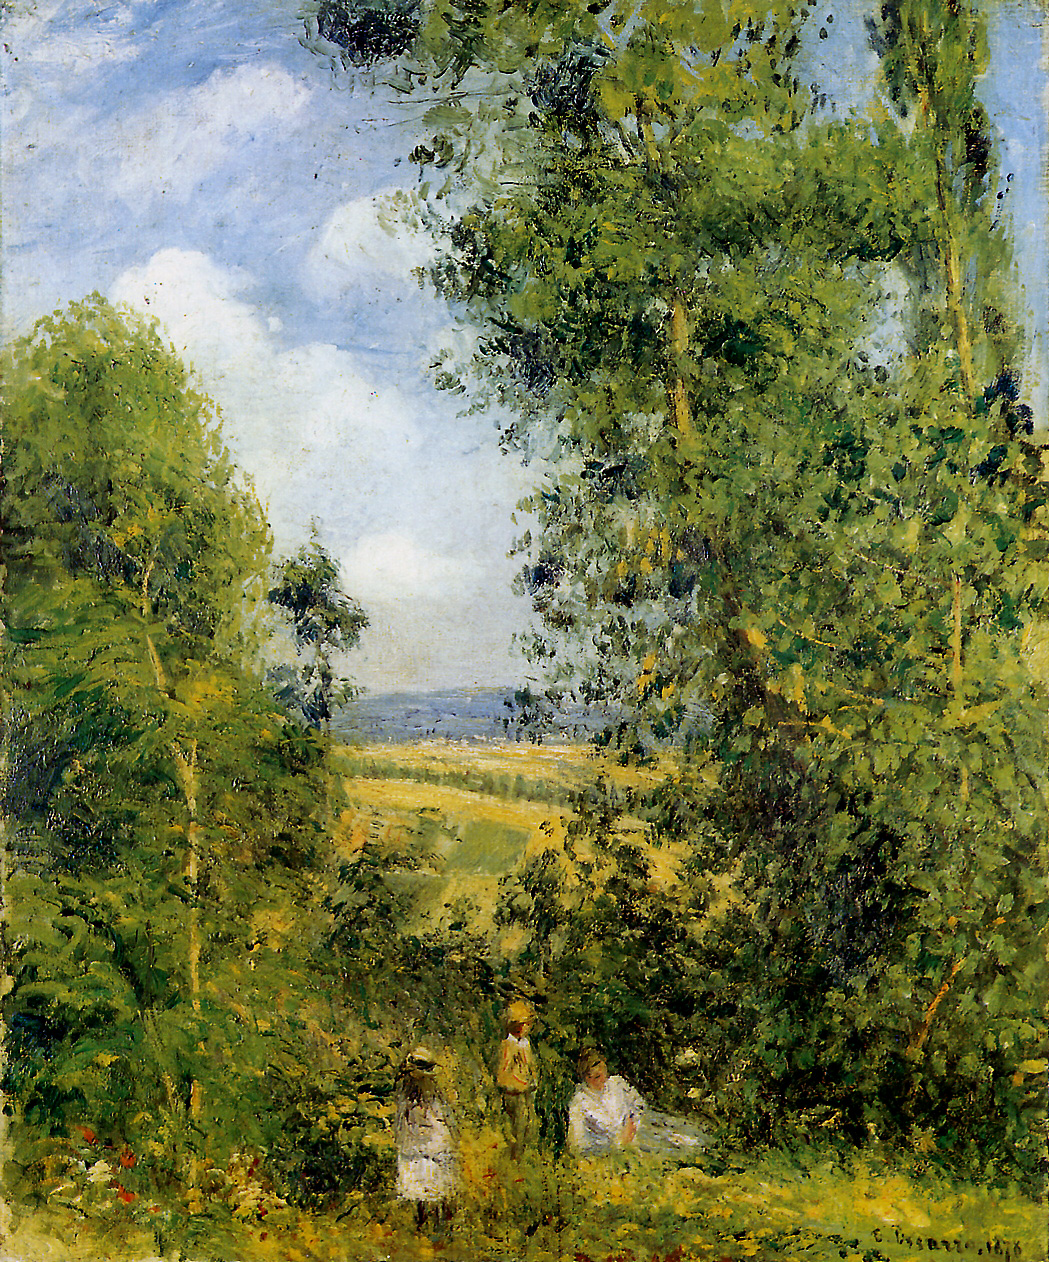 Resting in the woods Pontoise by Camille Pissarro, 1878